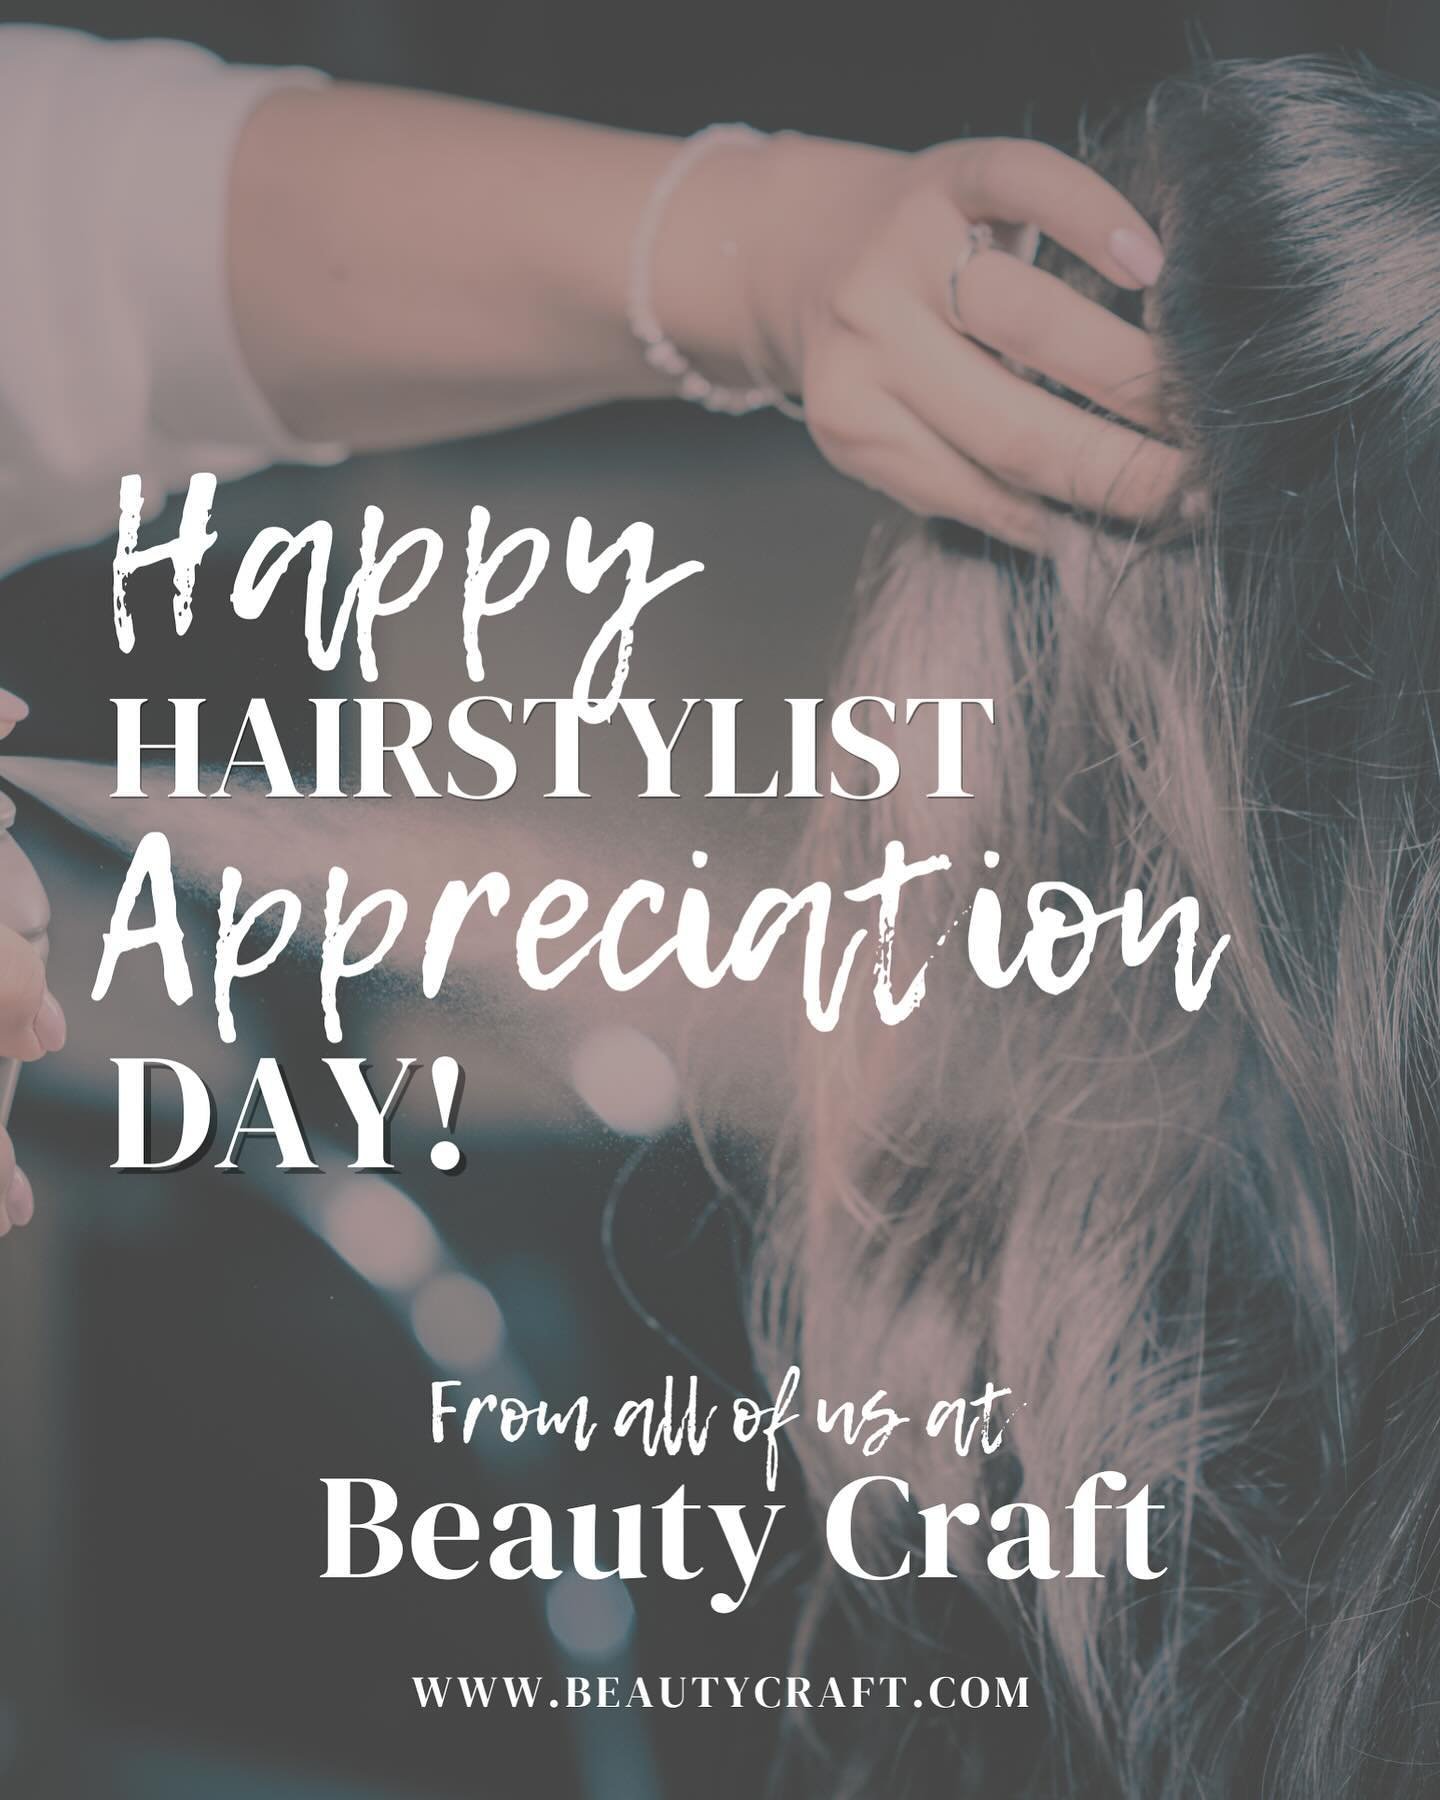 Some celebrate on April 25th.. some celebrate on April 30th.. at Beauty Craft, we celebrate every day!

✨ HAPPY HAIRSTYLIST APPRECIATION DAY ✨ from all of us at Beauty Craft! &hearts;️

We appreciate each and every incredible stylist out there.. ever